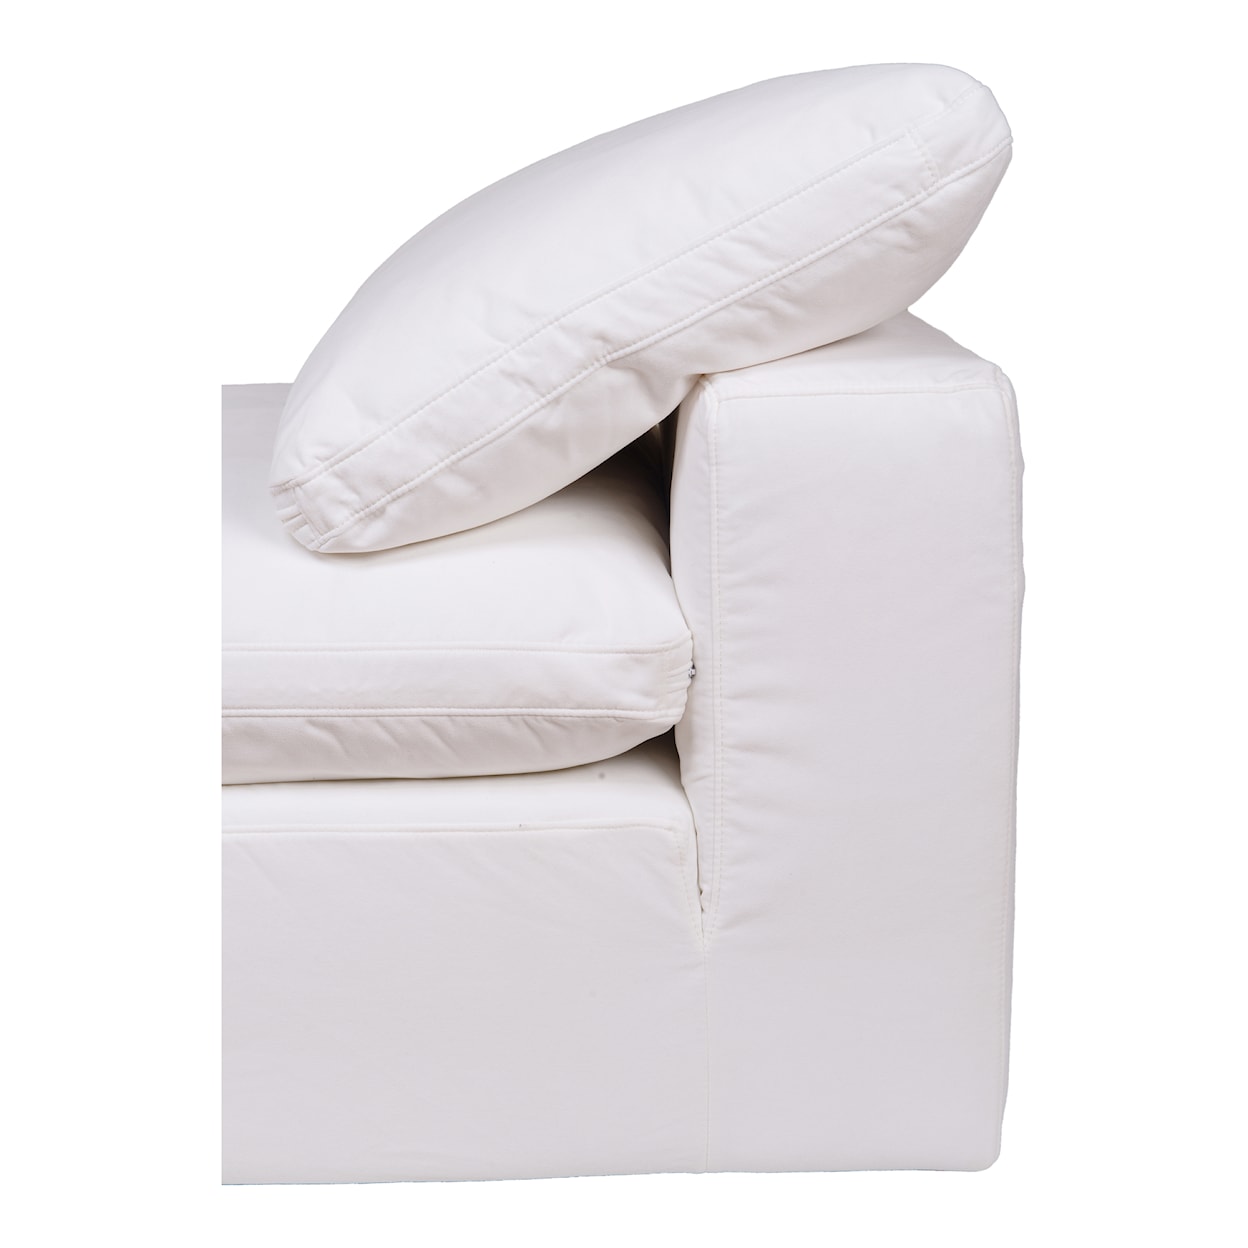 Moe's Home Collection Clay Clay Slipper Chair Livesmart Fabric White